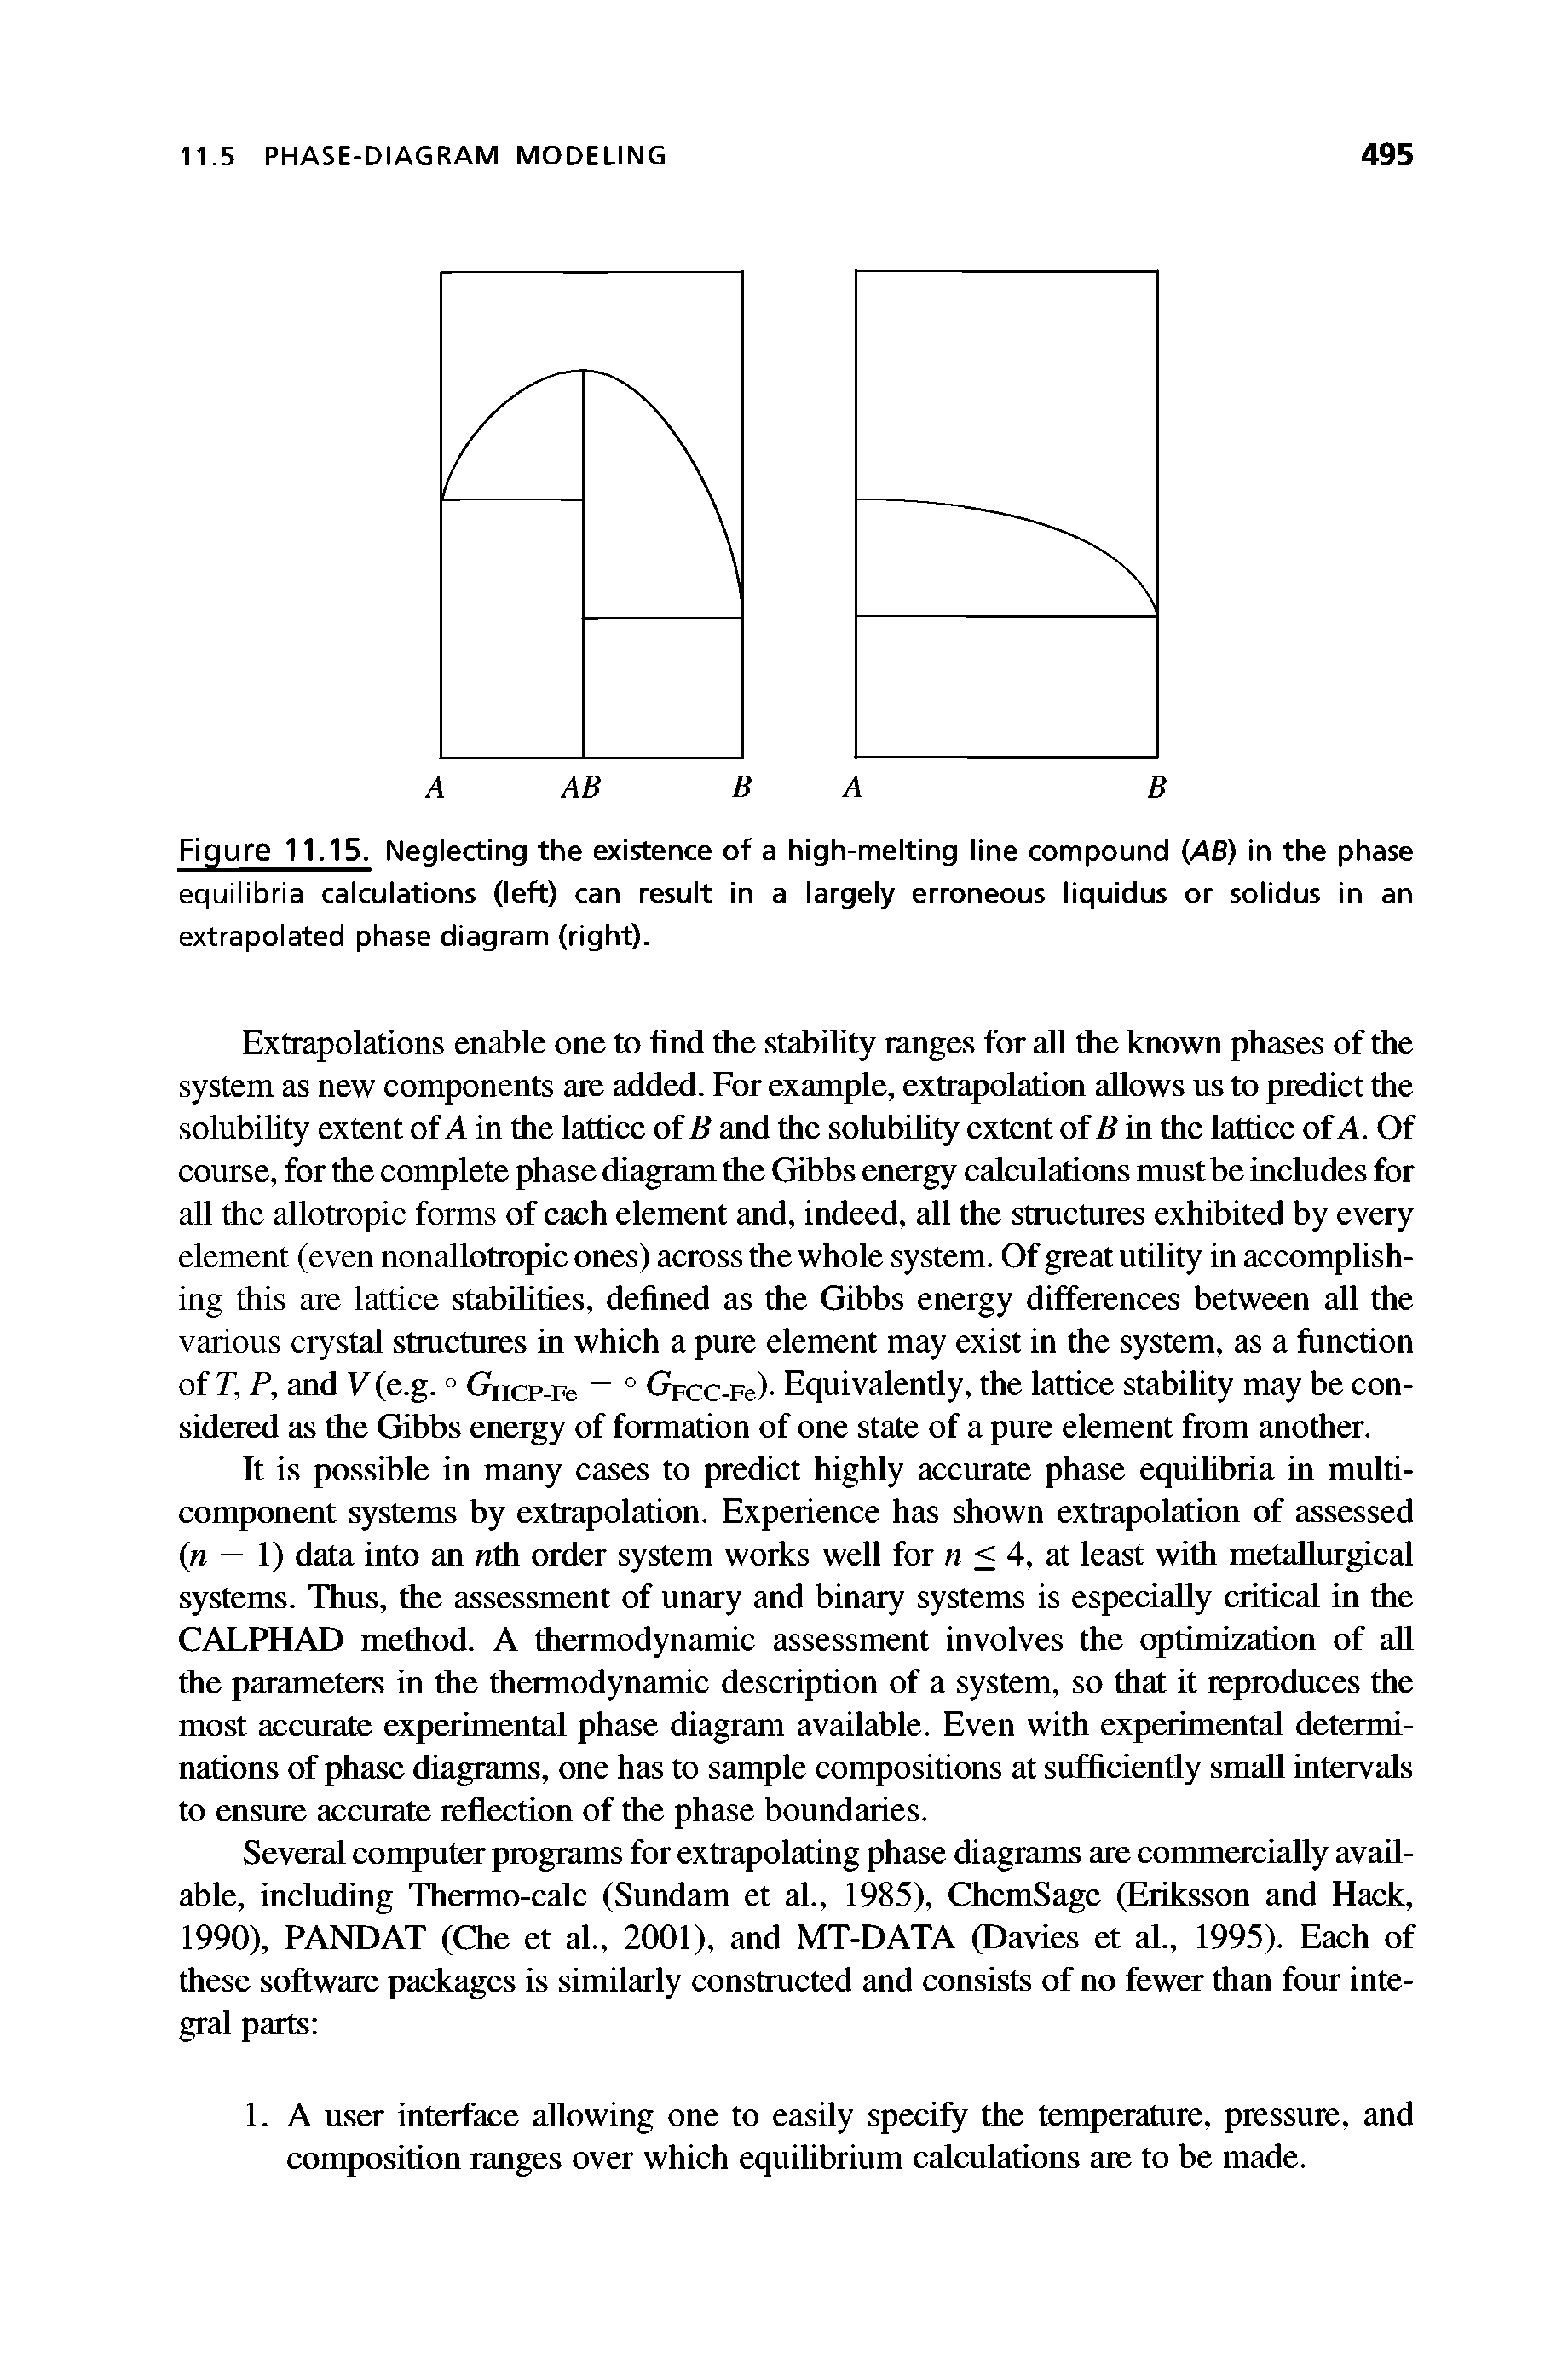 Figure 11.15. Neglecting the existence of a high-melting line compound (AS) in the phase equilibria calculations (left) can result in a largely erroneous liquidus or solidus in an extrapolated phase diagram (right).